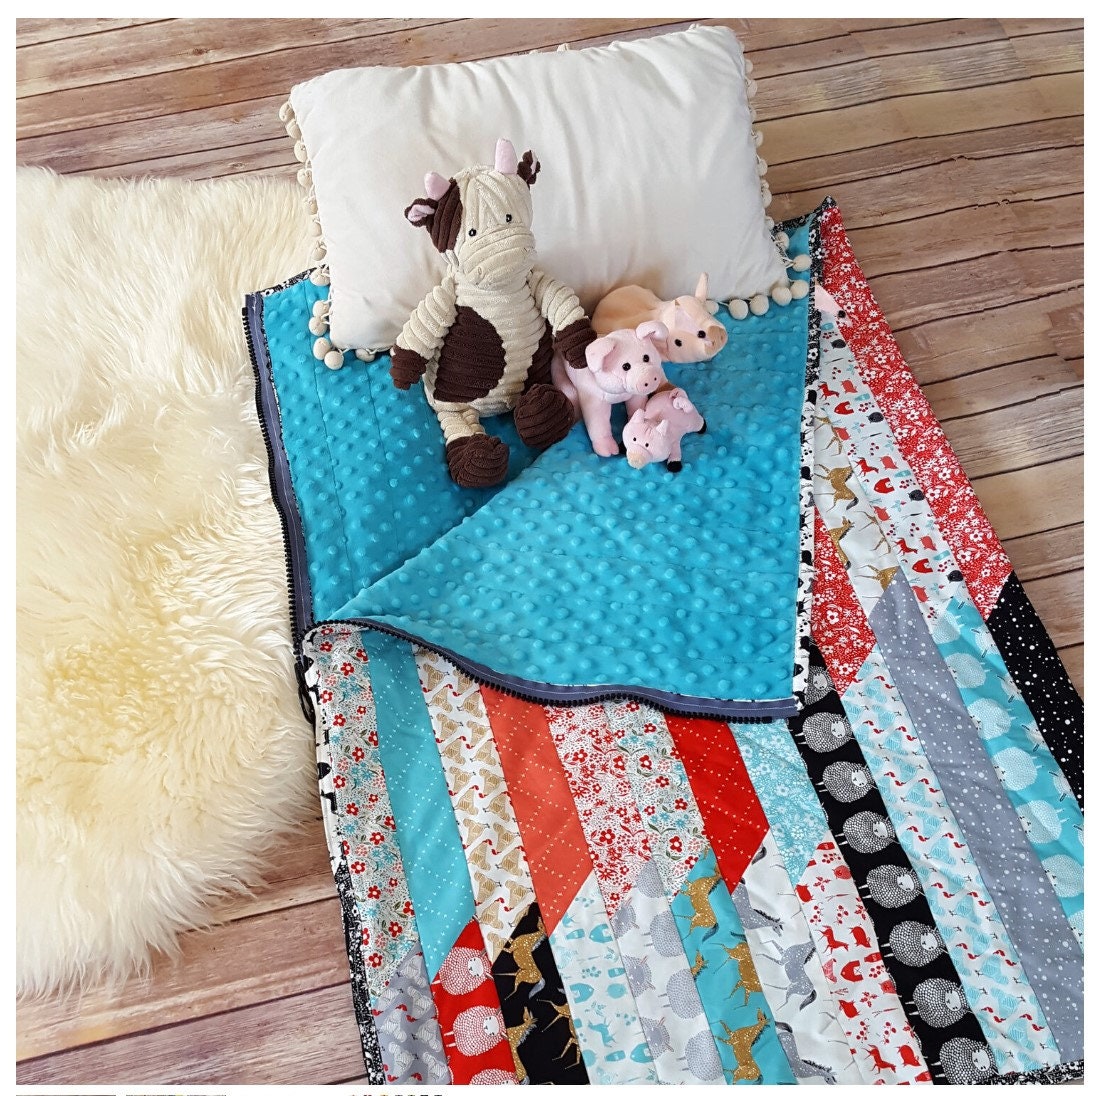 Sewing By Sarah - Spiro-Quilt Free Motion Quilting Set